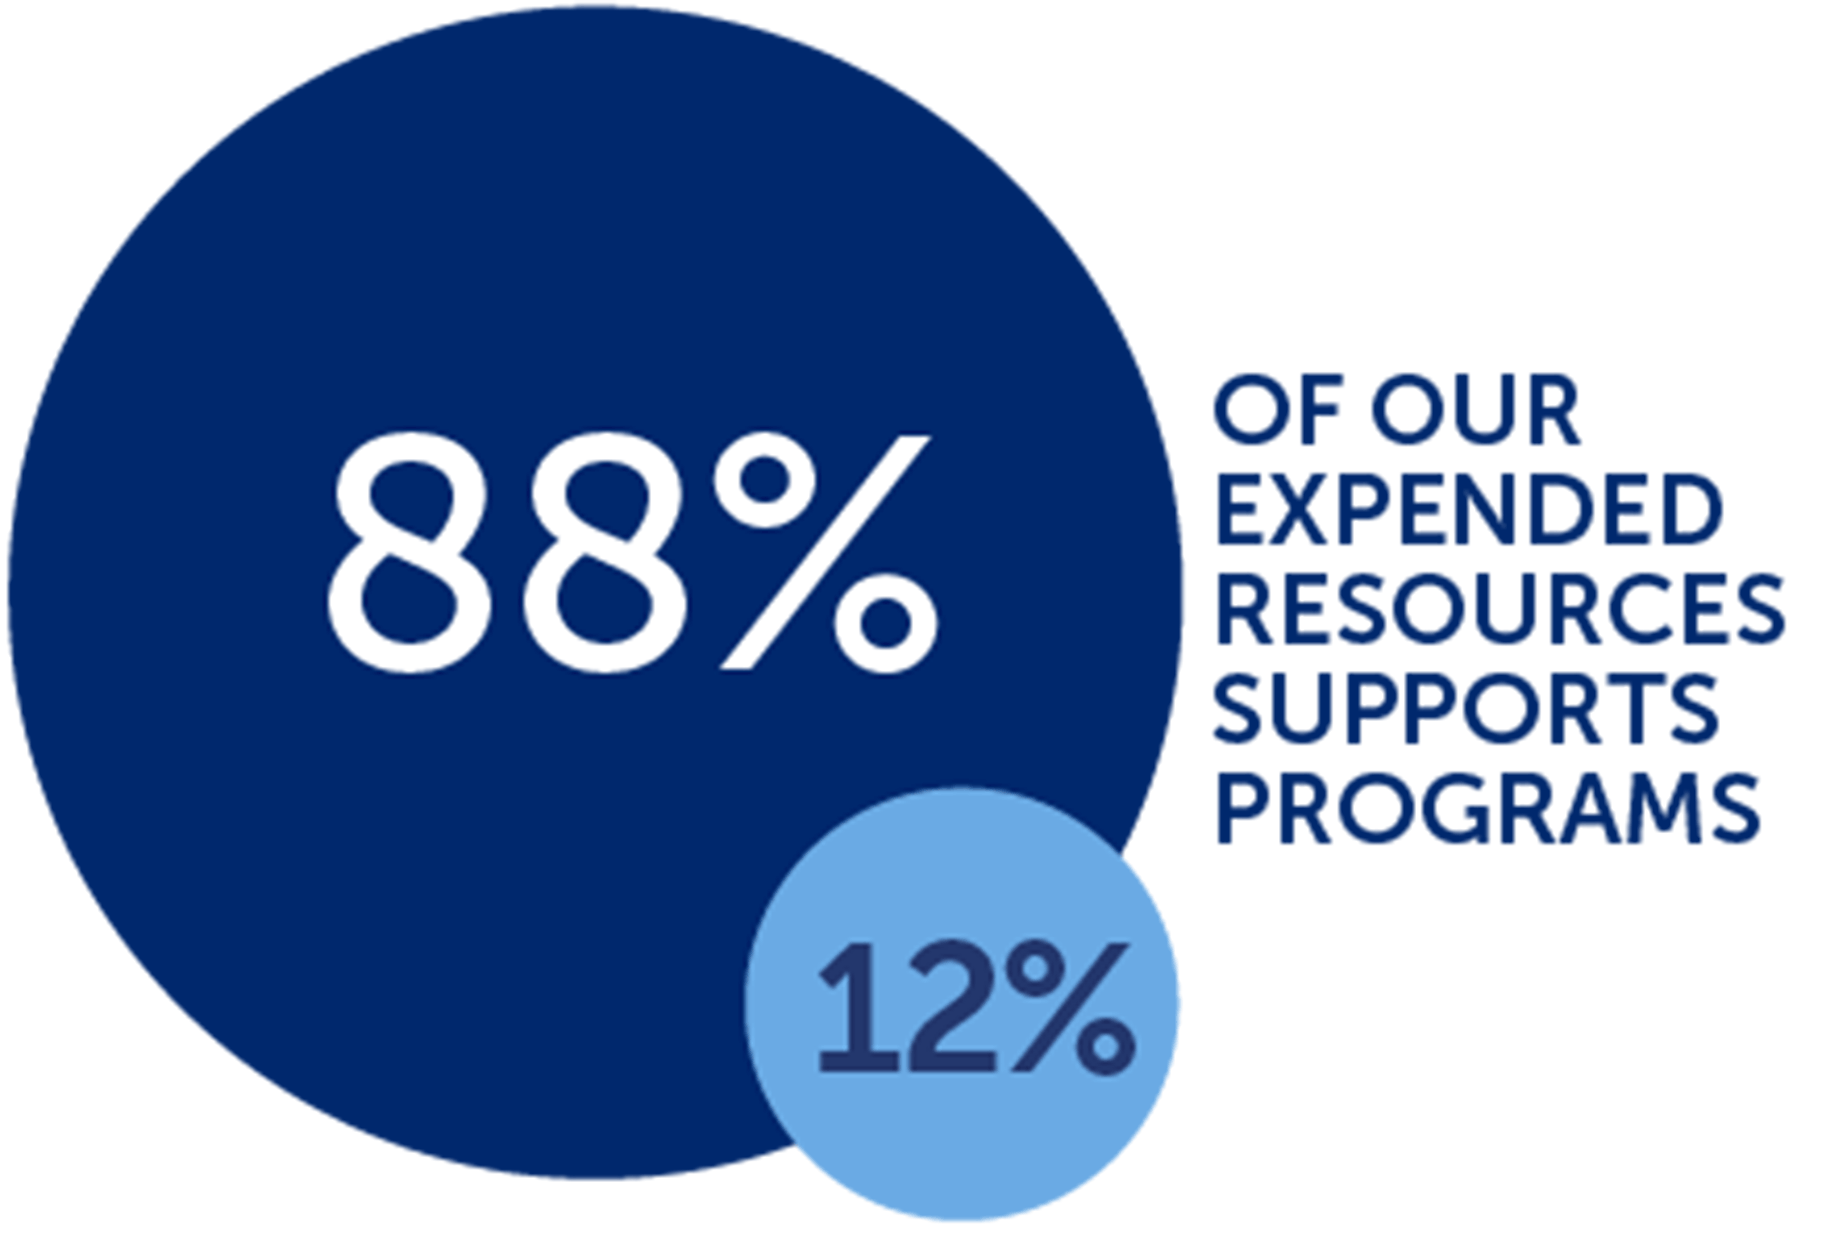 87% of our expended resources supports programs. 13% supports administration and fundraising.